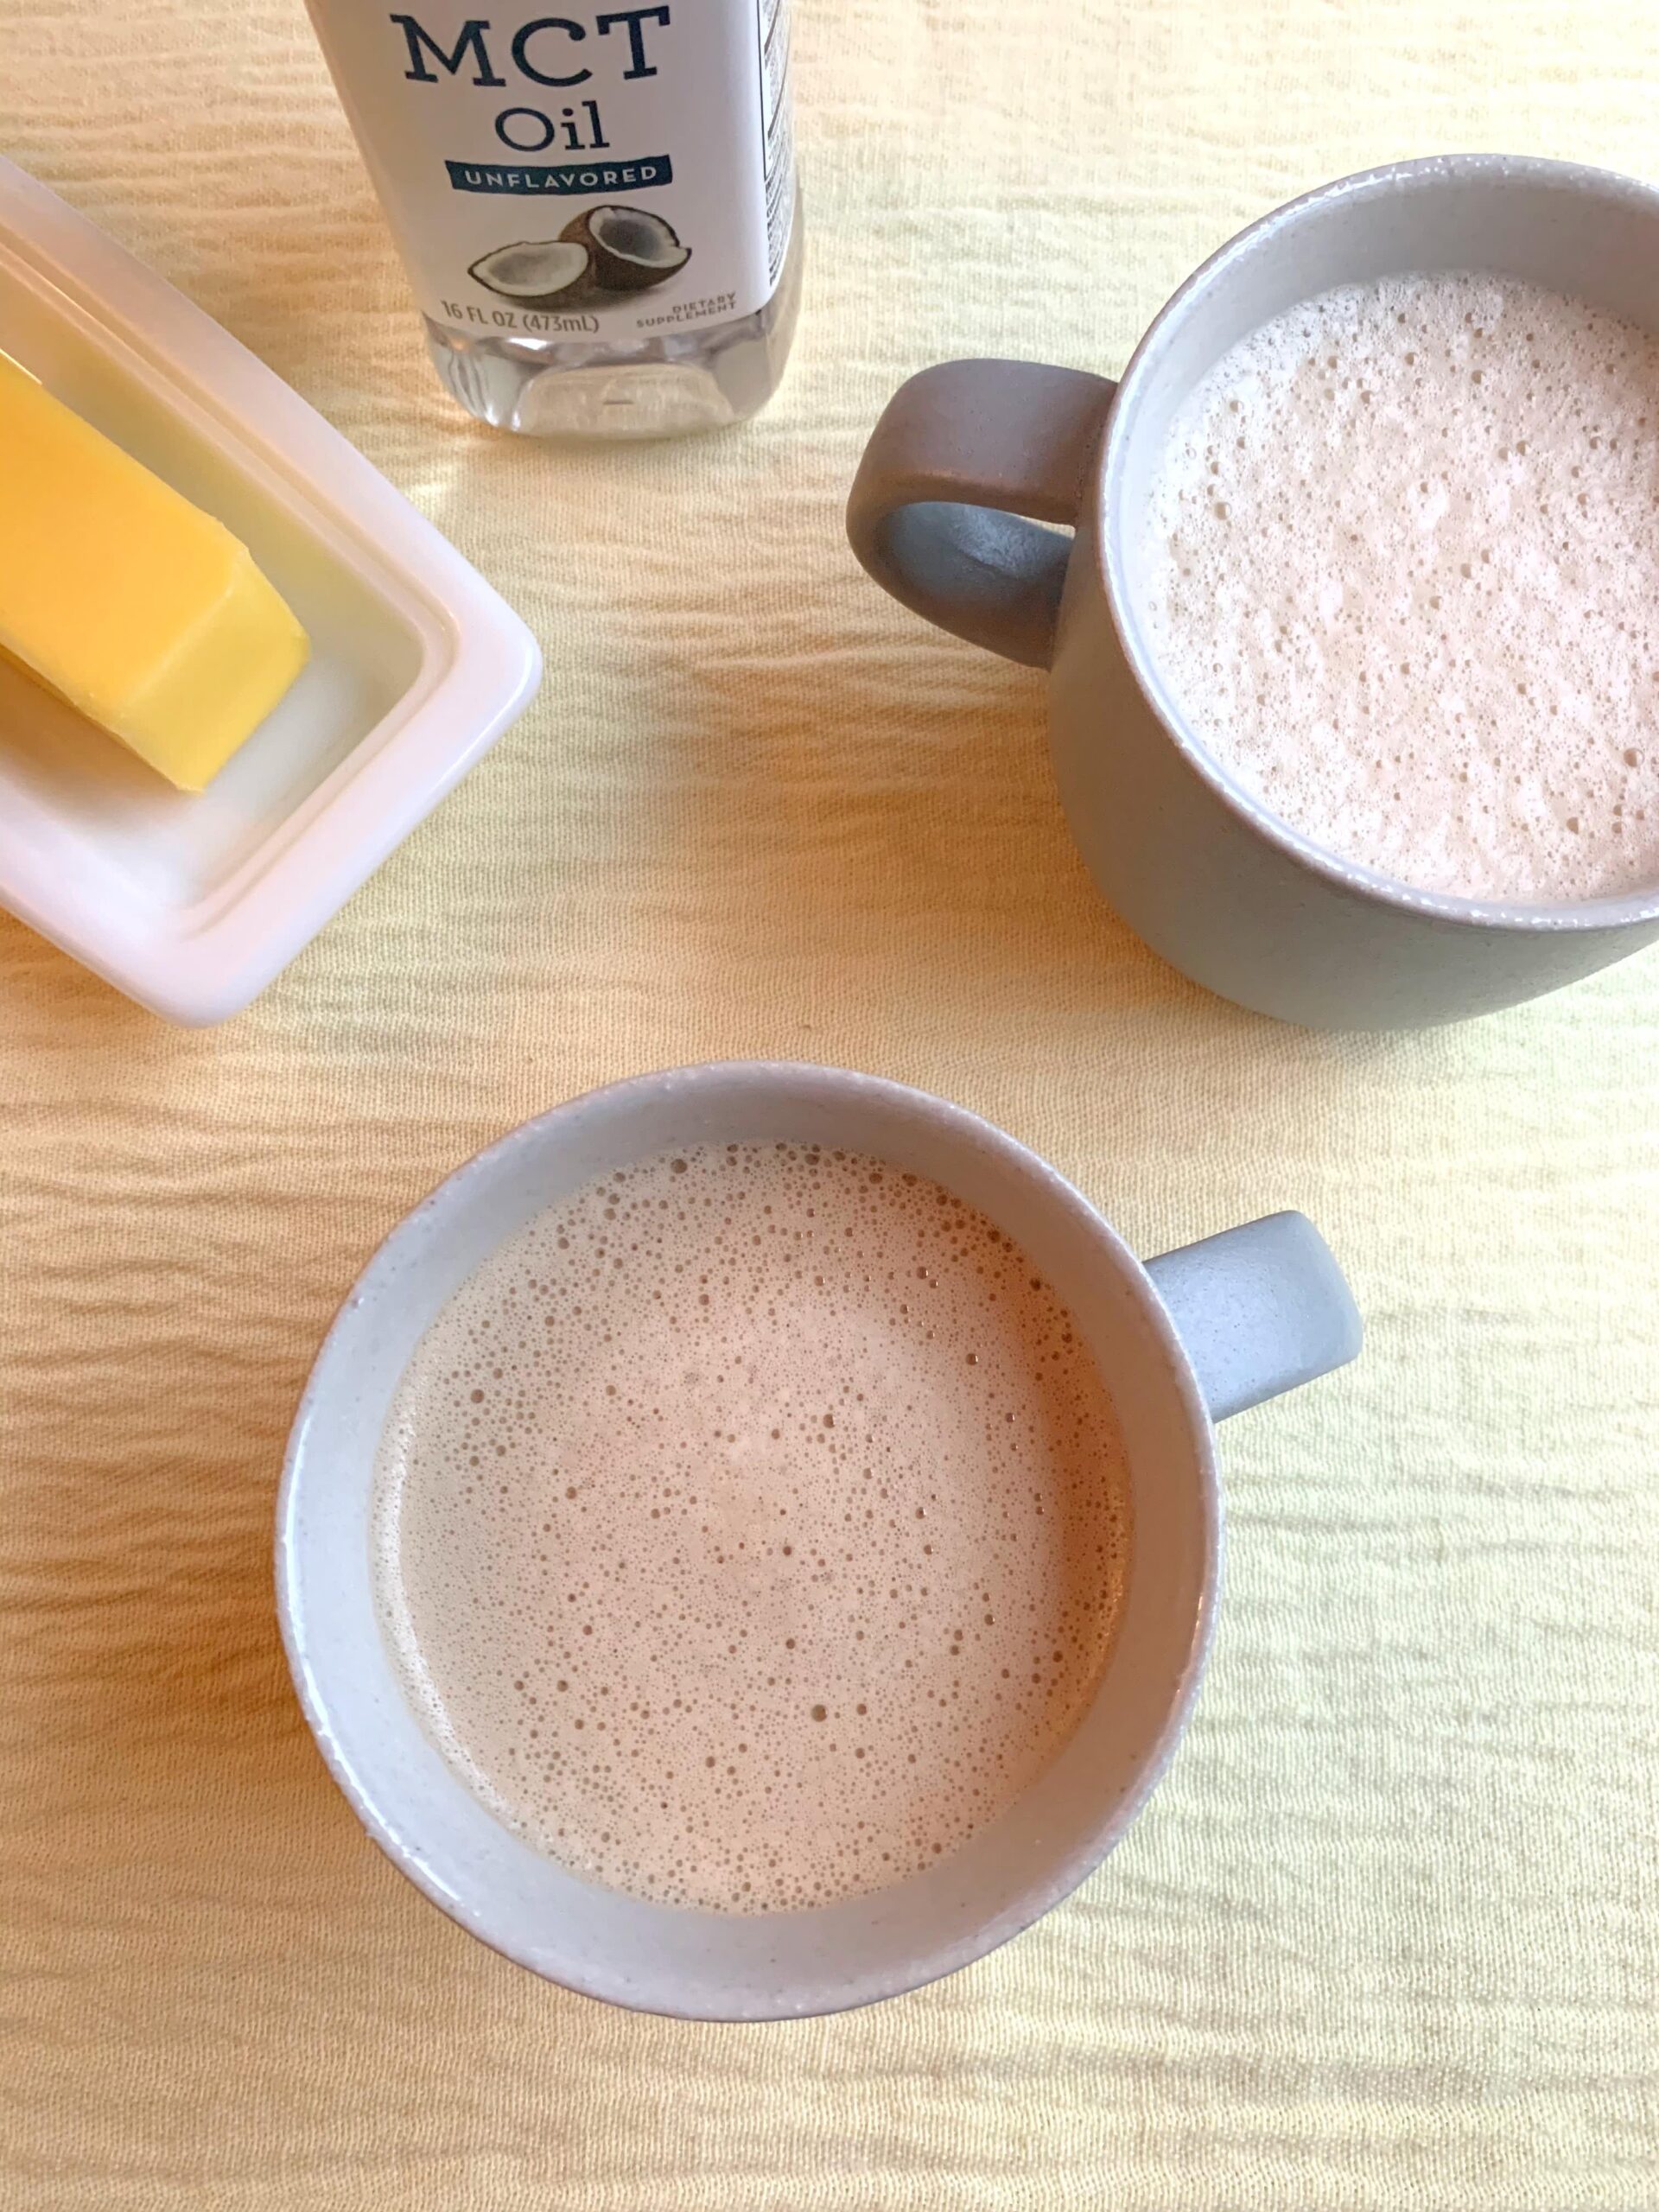  This Creamy Keto Coffee is so good, it'll have you jumping out of bed in the morning.